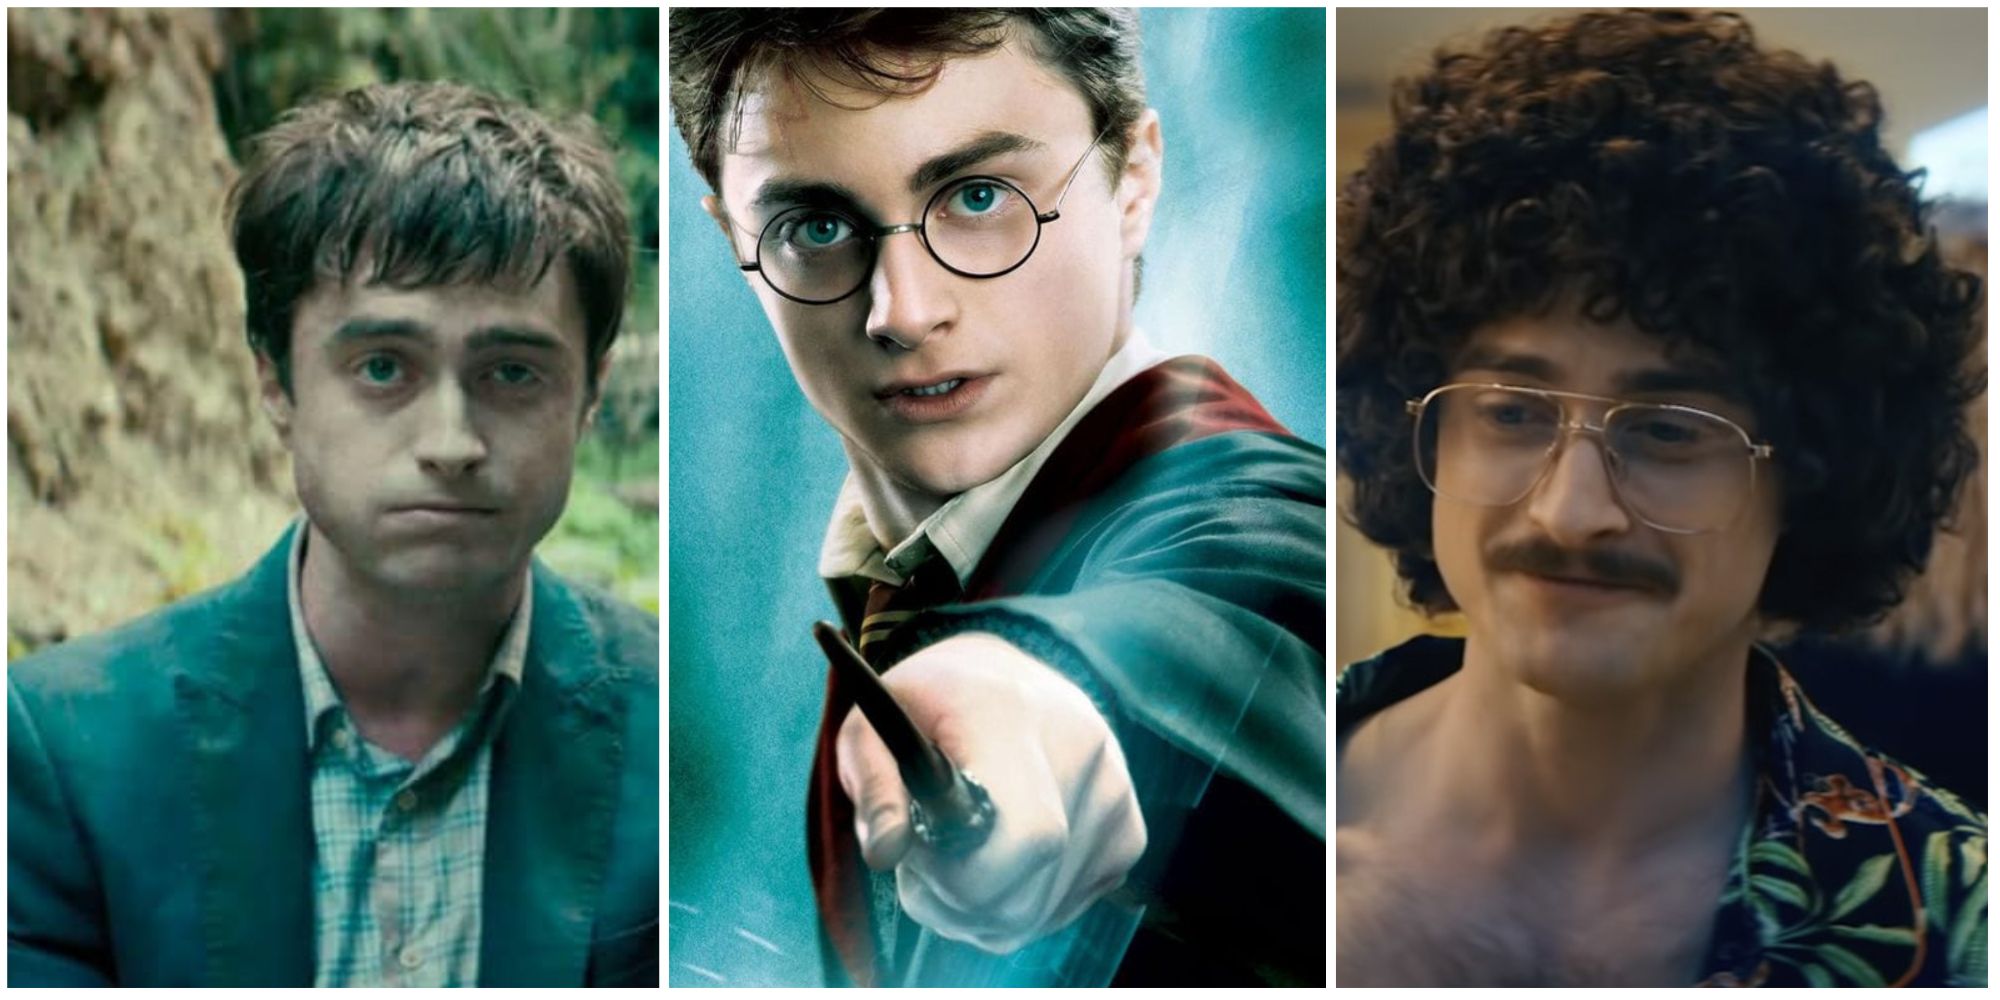 manny, harry potter and weird al, played by daniel radcliffe 